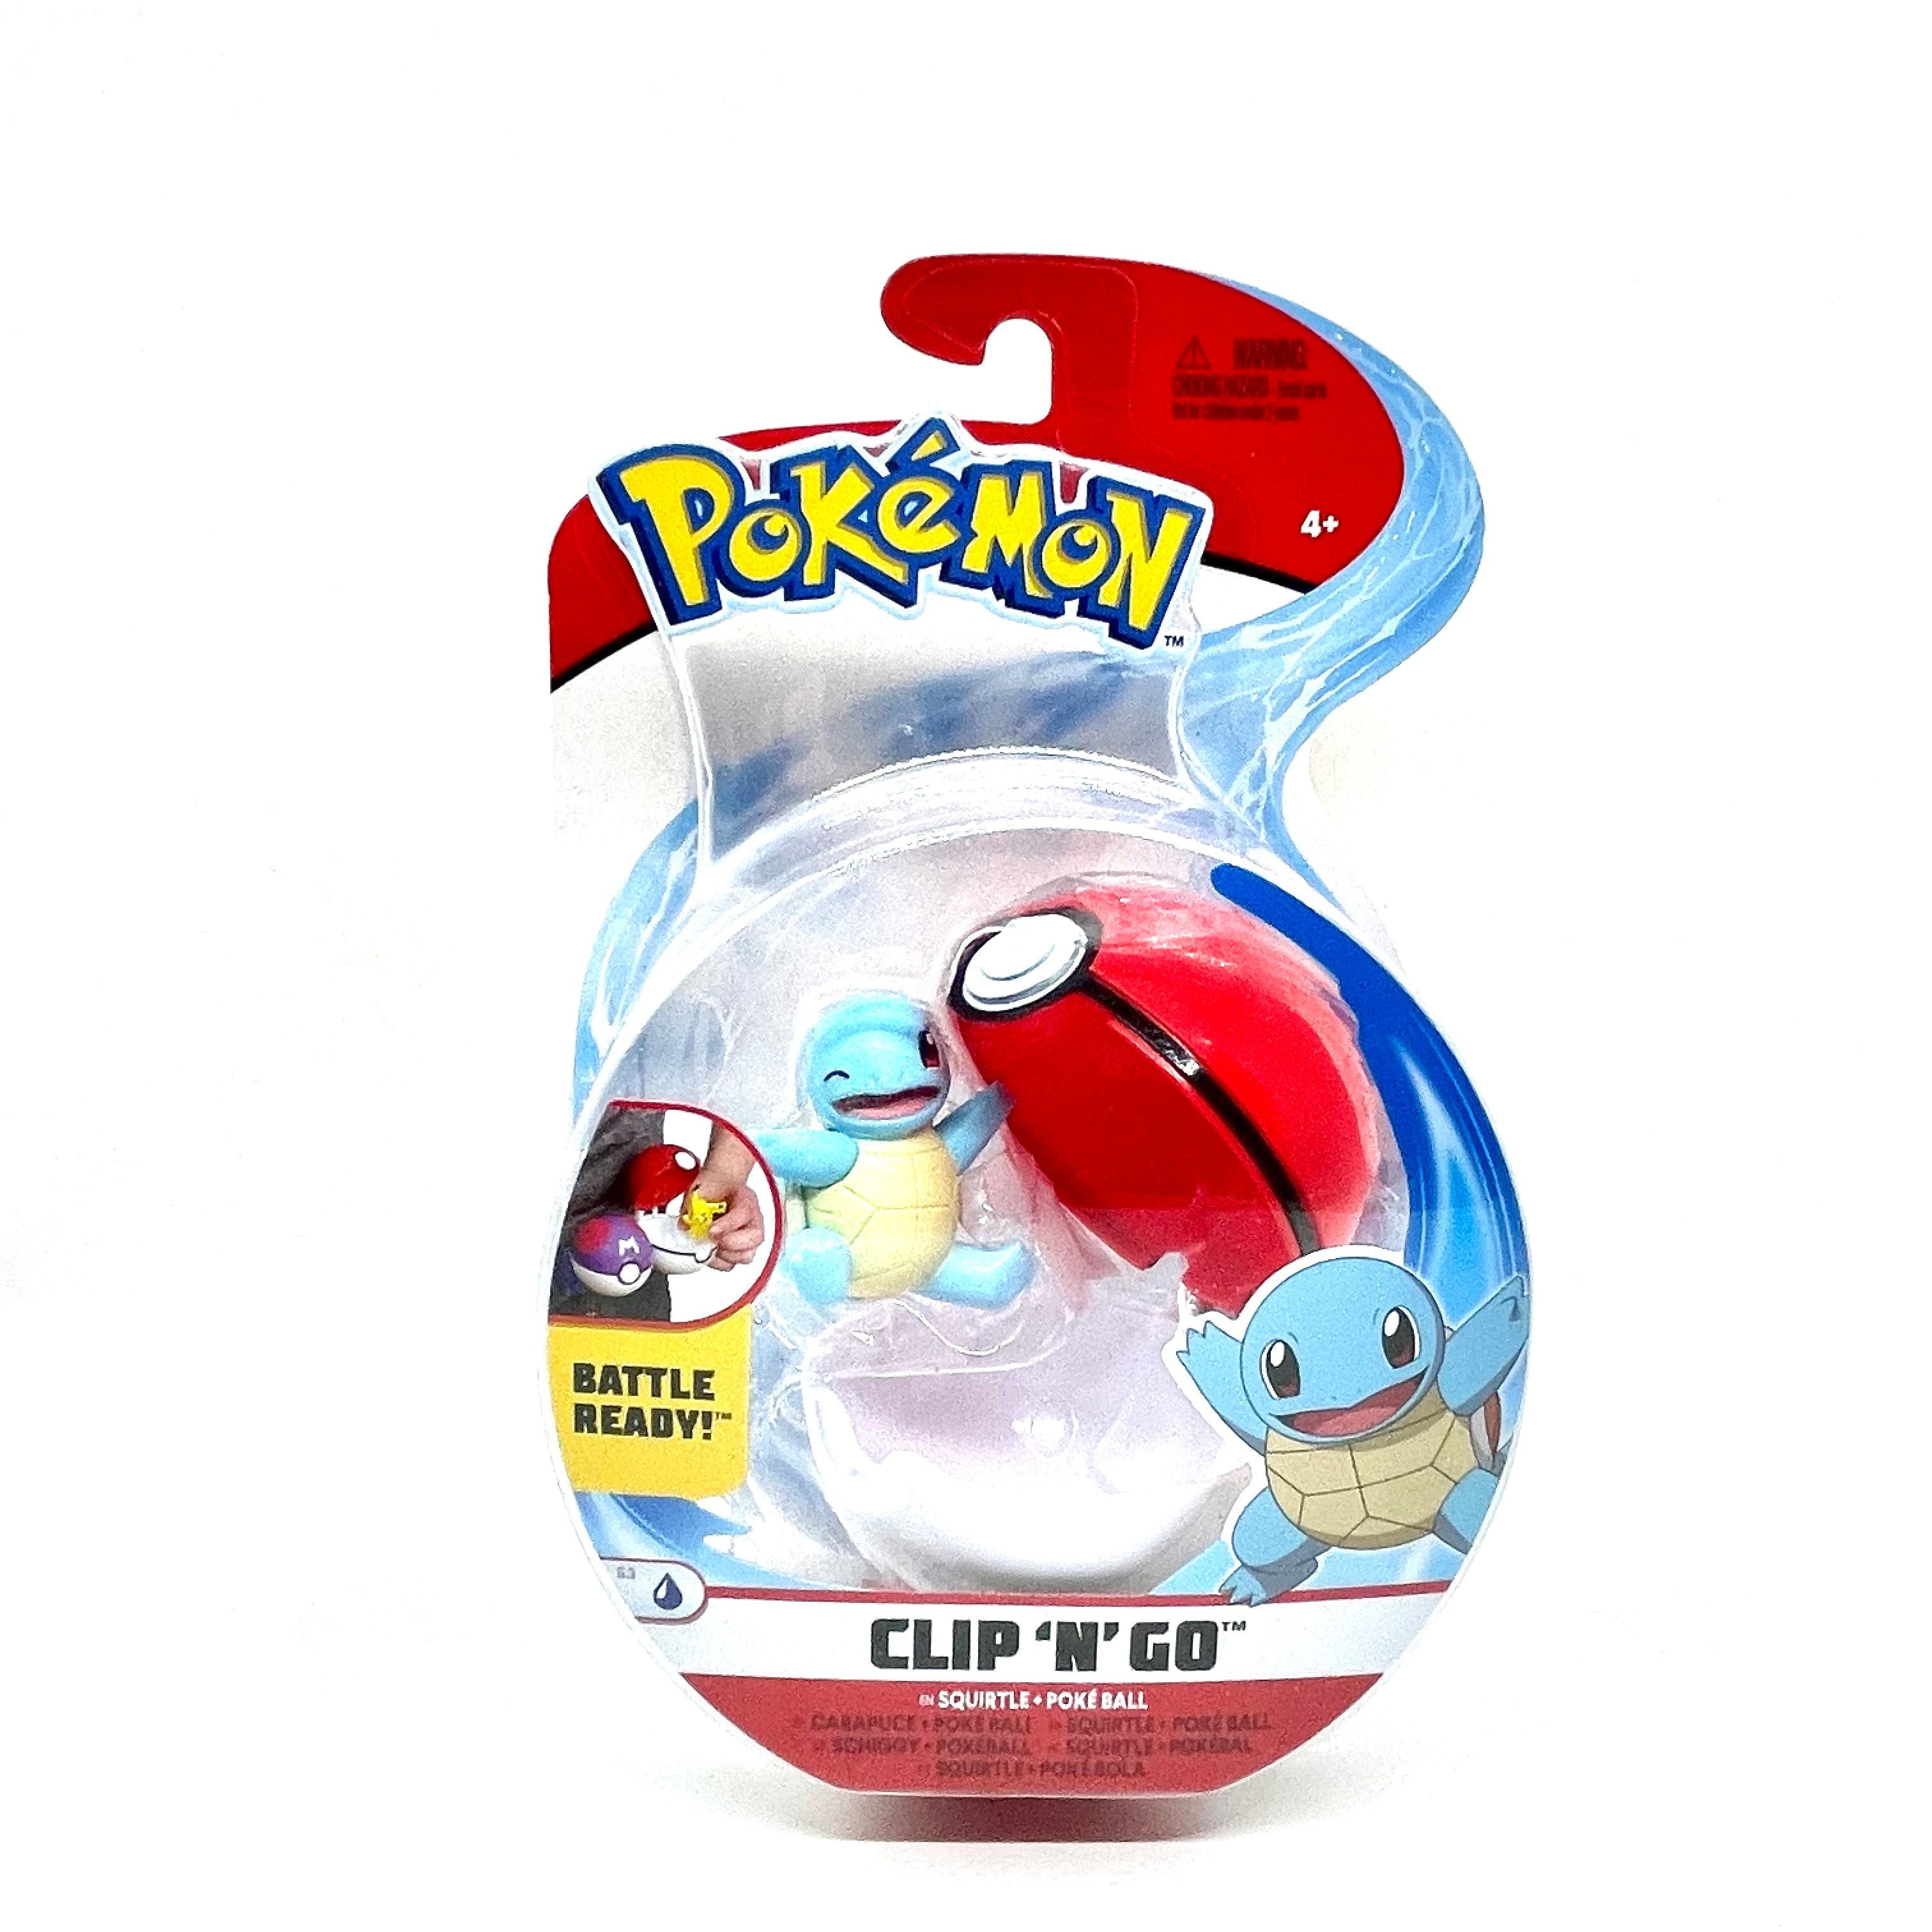 Details about   POKEMON CLIP N GO EEVEE & POKE BALL ☆ Battle Ready Action Figure Toy JAZWARES ☆ 